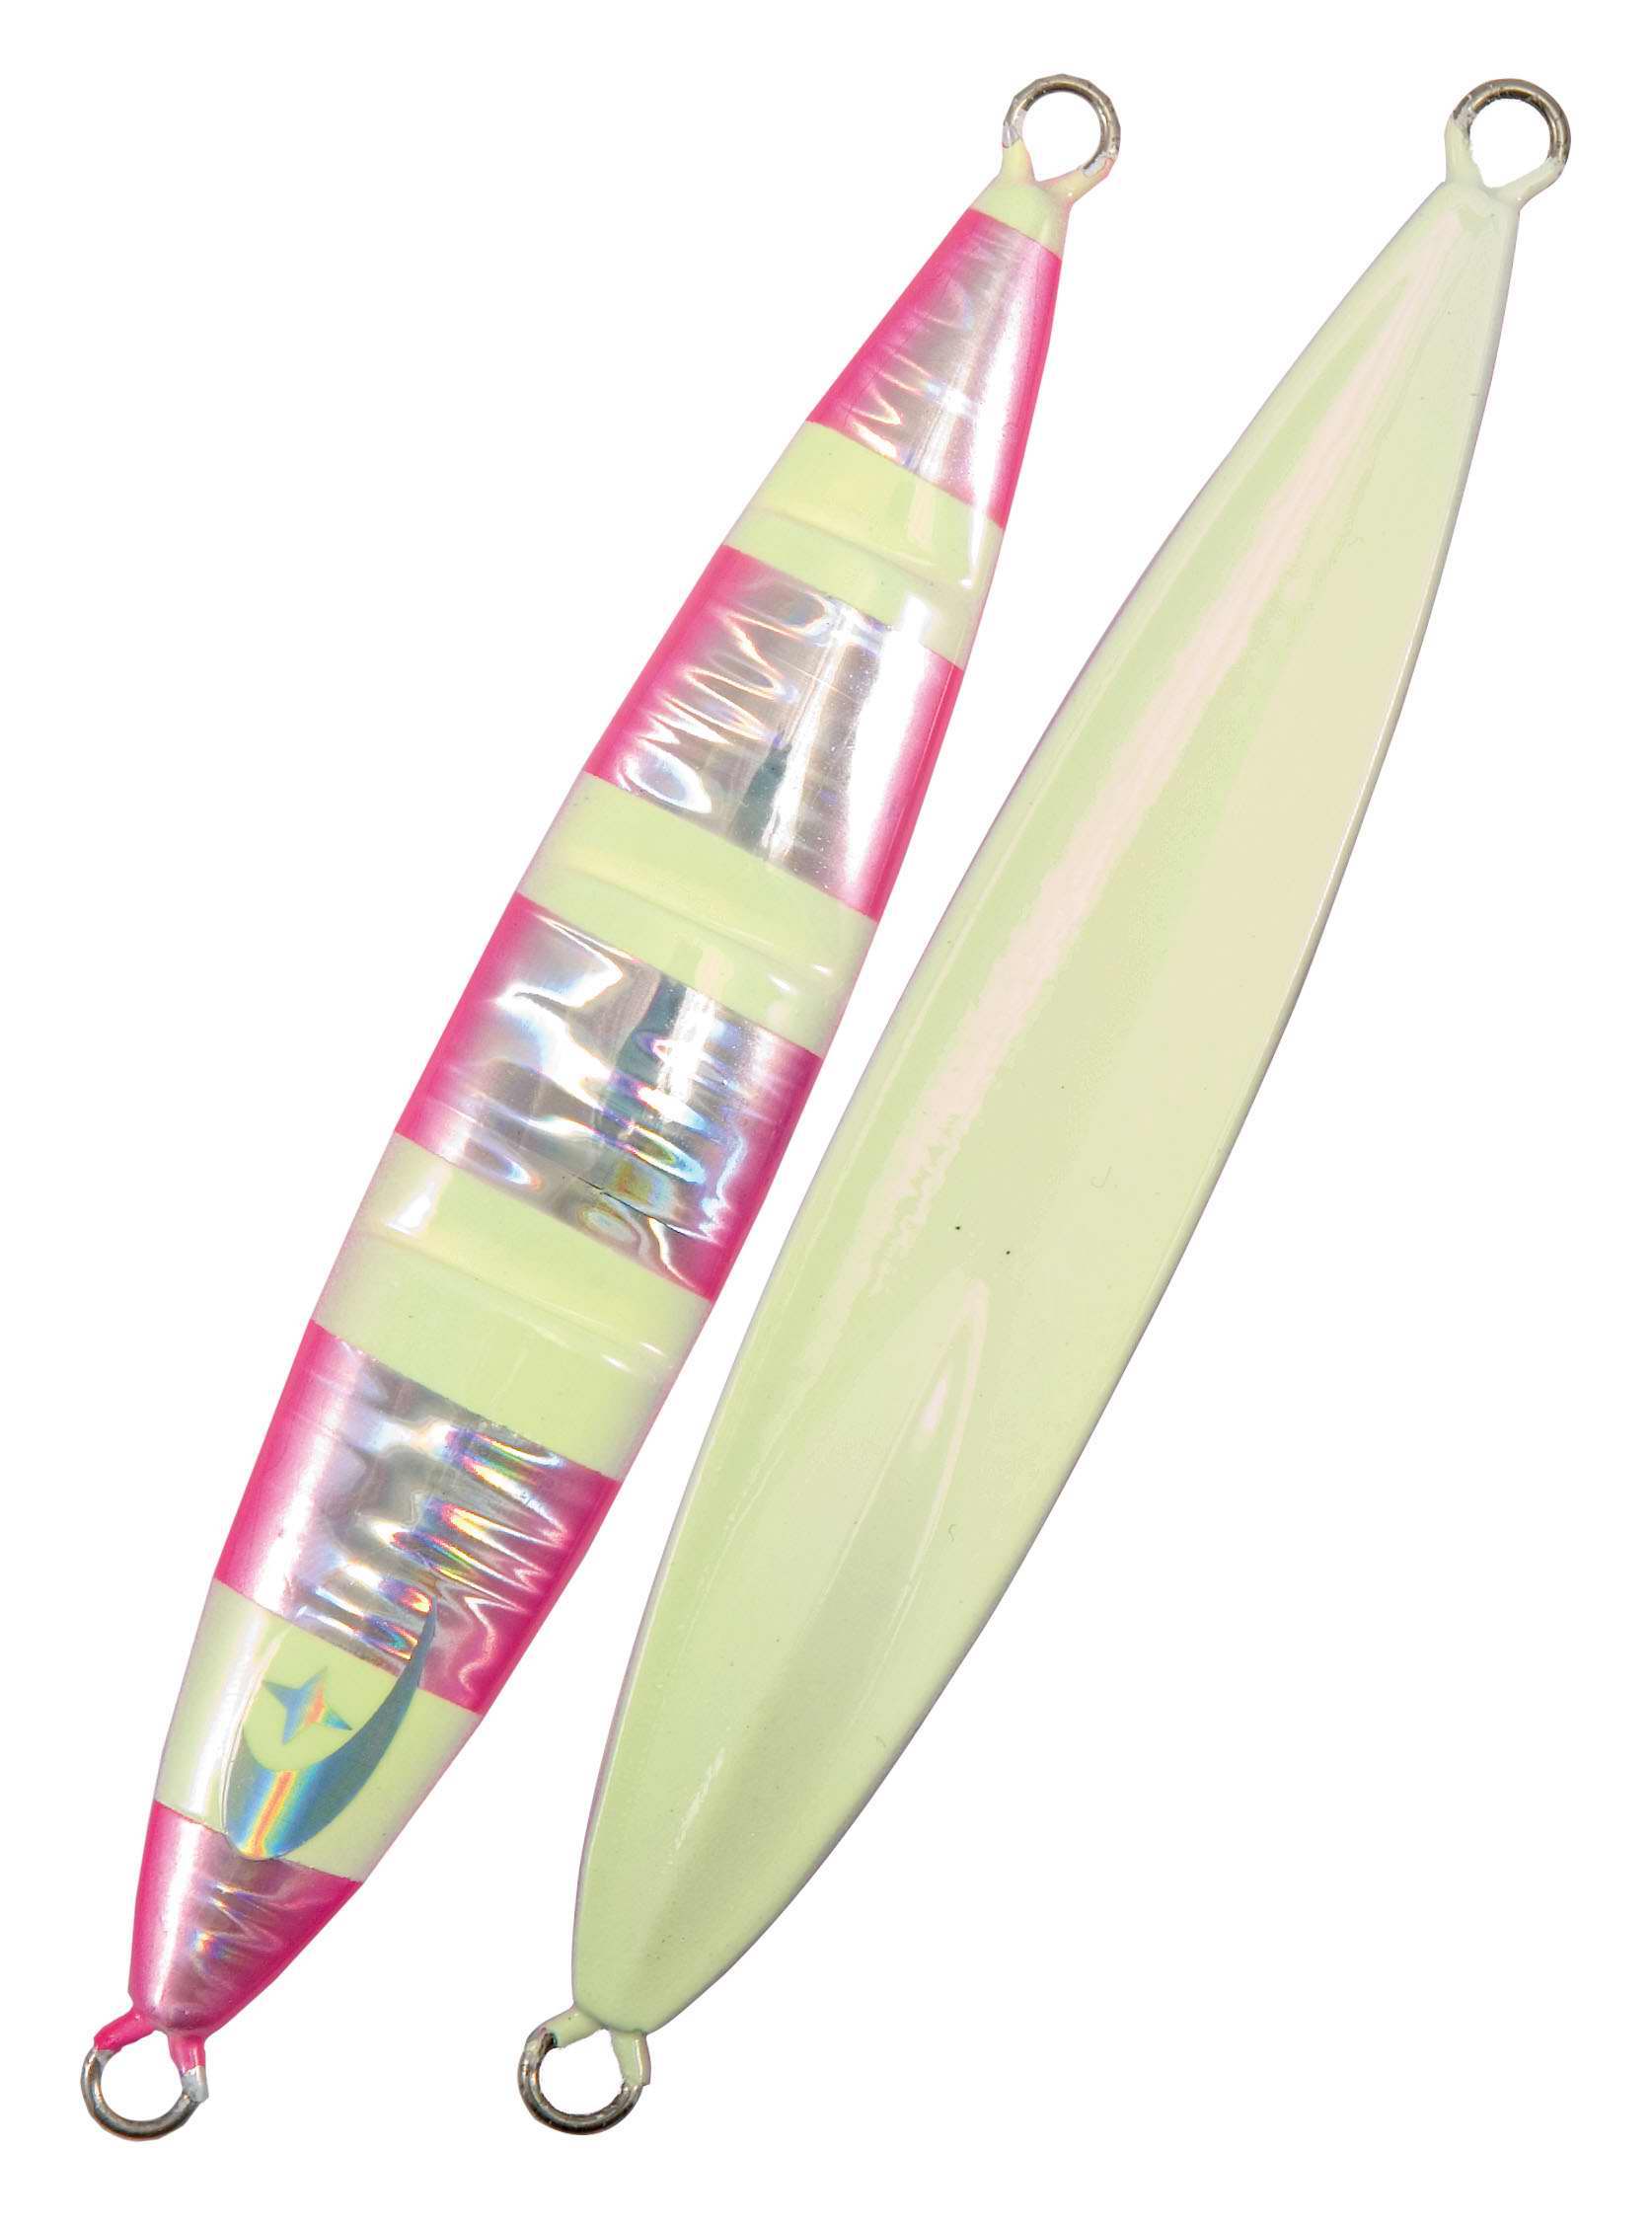 OUT/OUT_ARTICOLI/areapesca.it_AP01109.3444.3440_yume-metal-jig-11-cm---80-gr-pink-silver-with-fluo-stripes.jpg